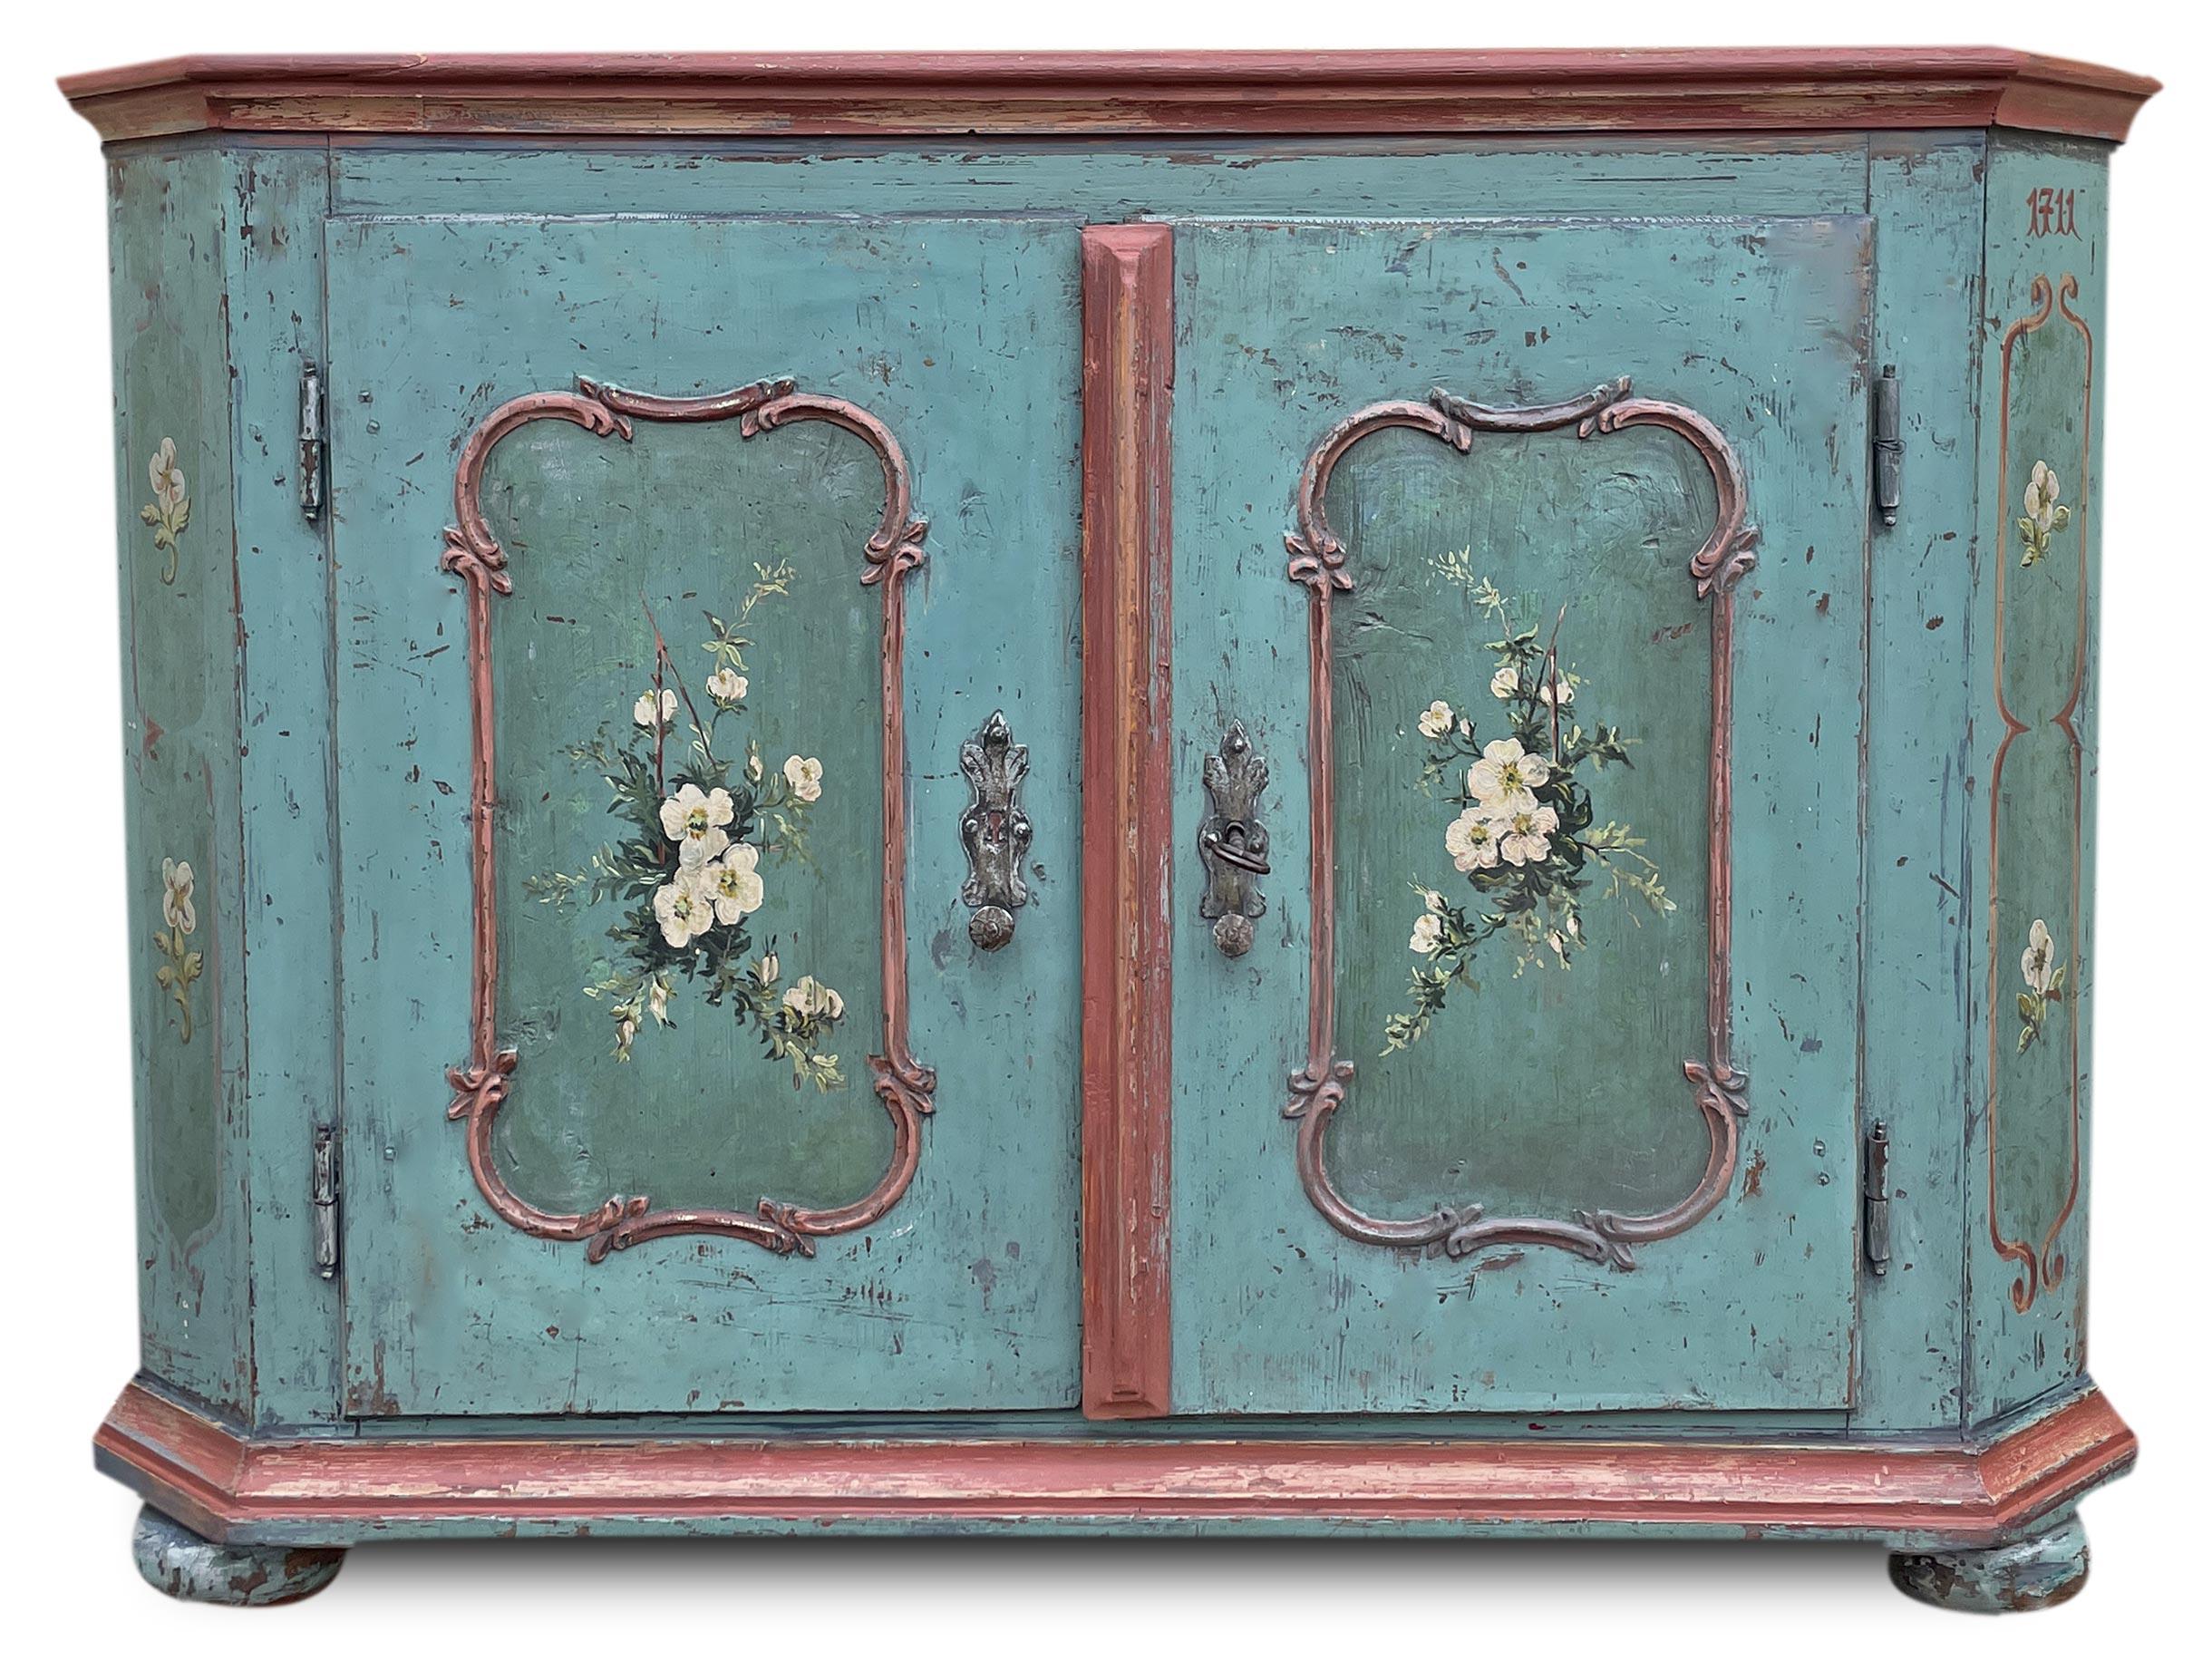 Tyrolean Painted Sideboard Dated 1711

Epoca: 1711	           
Origin: Tyrol	           
Wood: Fir	   
Measurements:  Height: 93cm - Width: 125 cm - Depth: 45 cm

Rare and beautiful painted sideboard with two doors, entirely painted in intense blue.